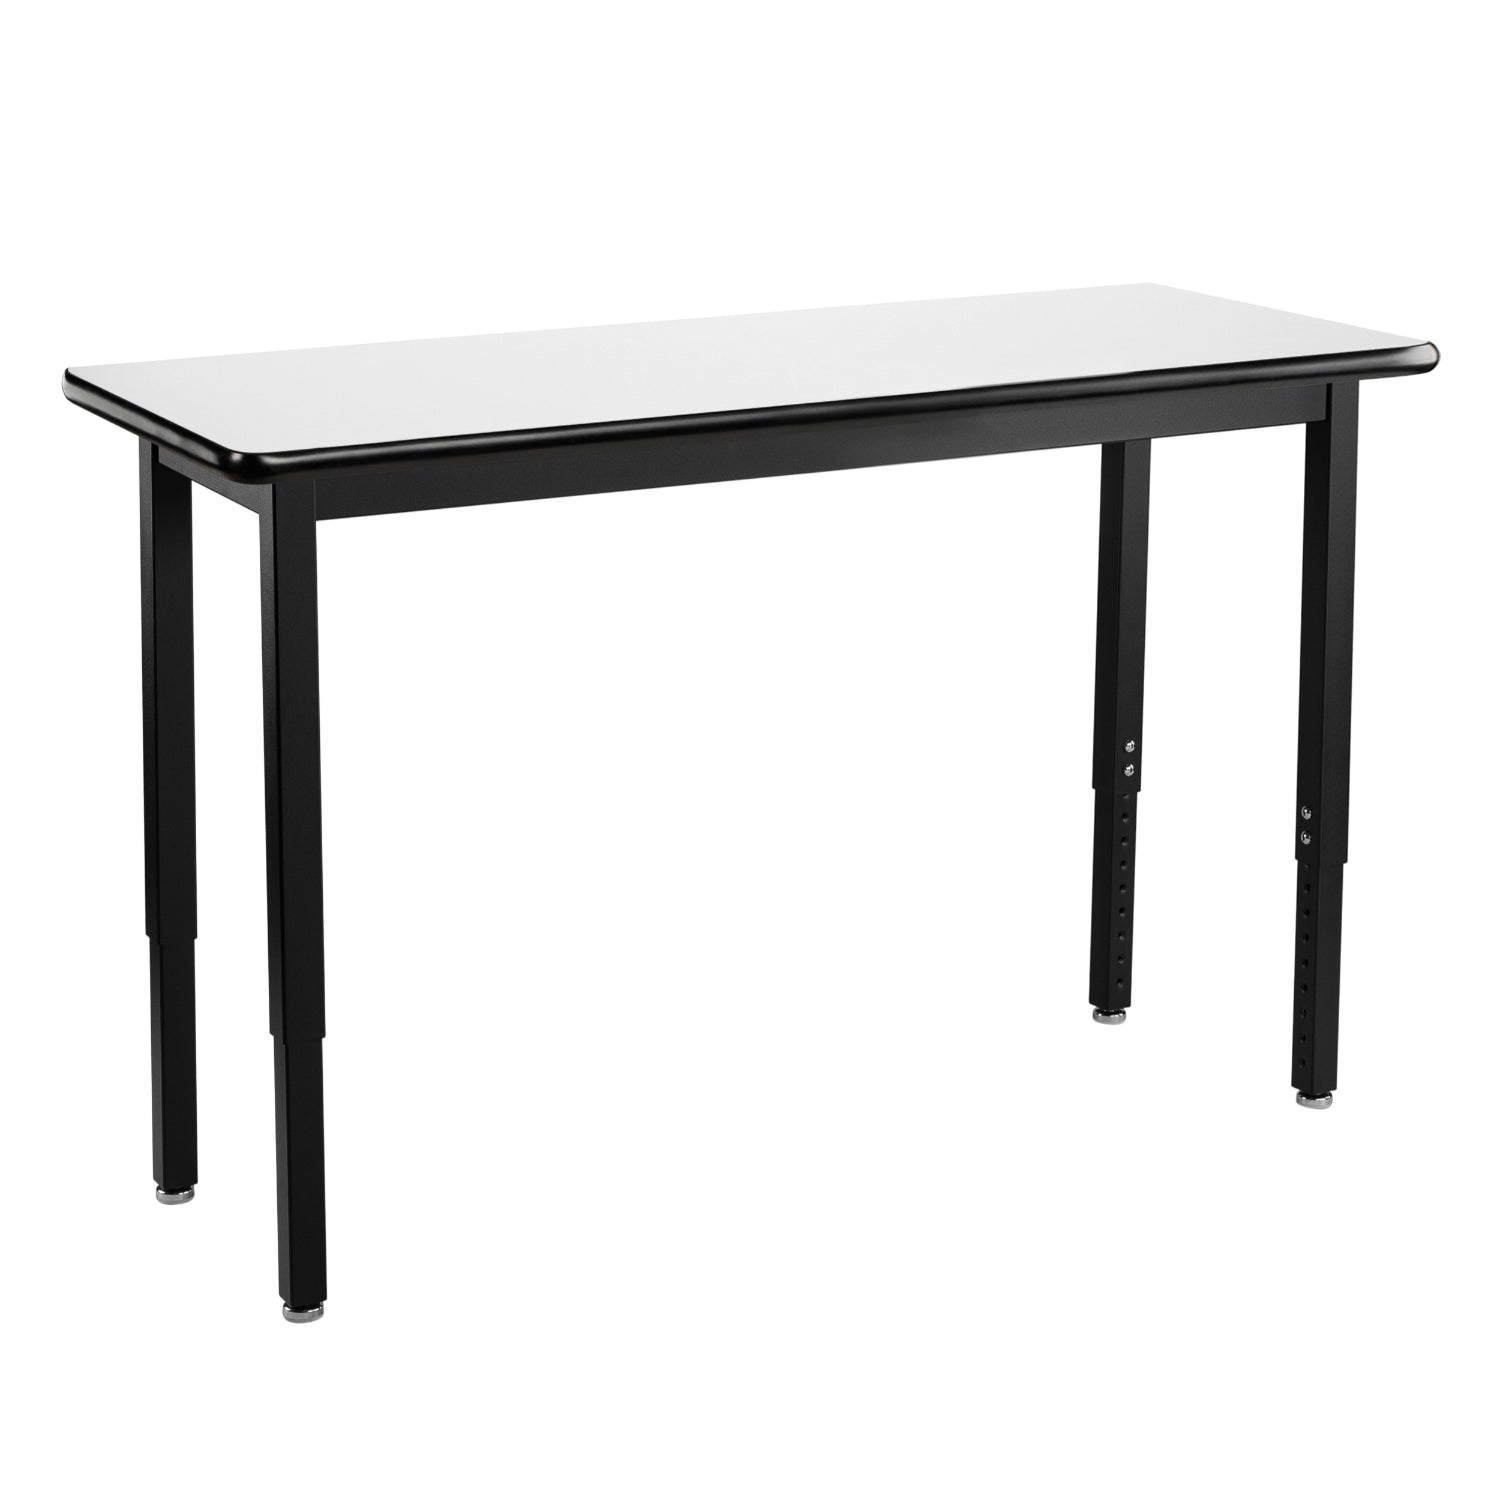 Heavy-Duty Height-Adjustable Utility Table, Black Frame, 18" x 96", Whiteboard High-Pressure Laminate Top